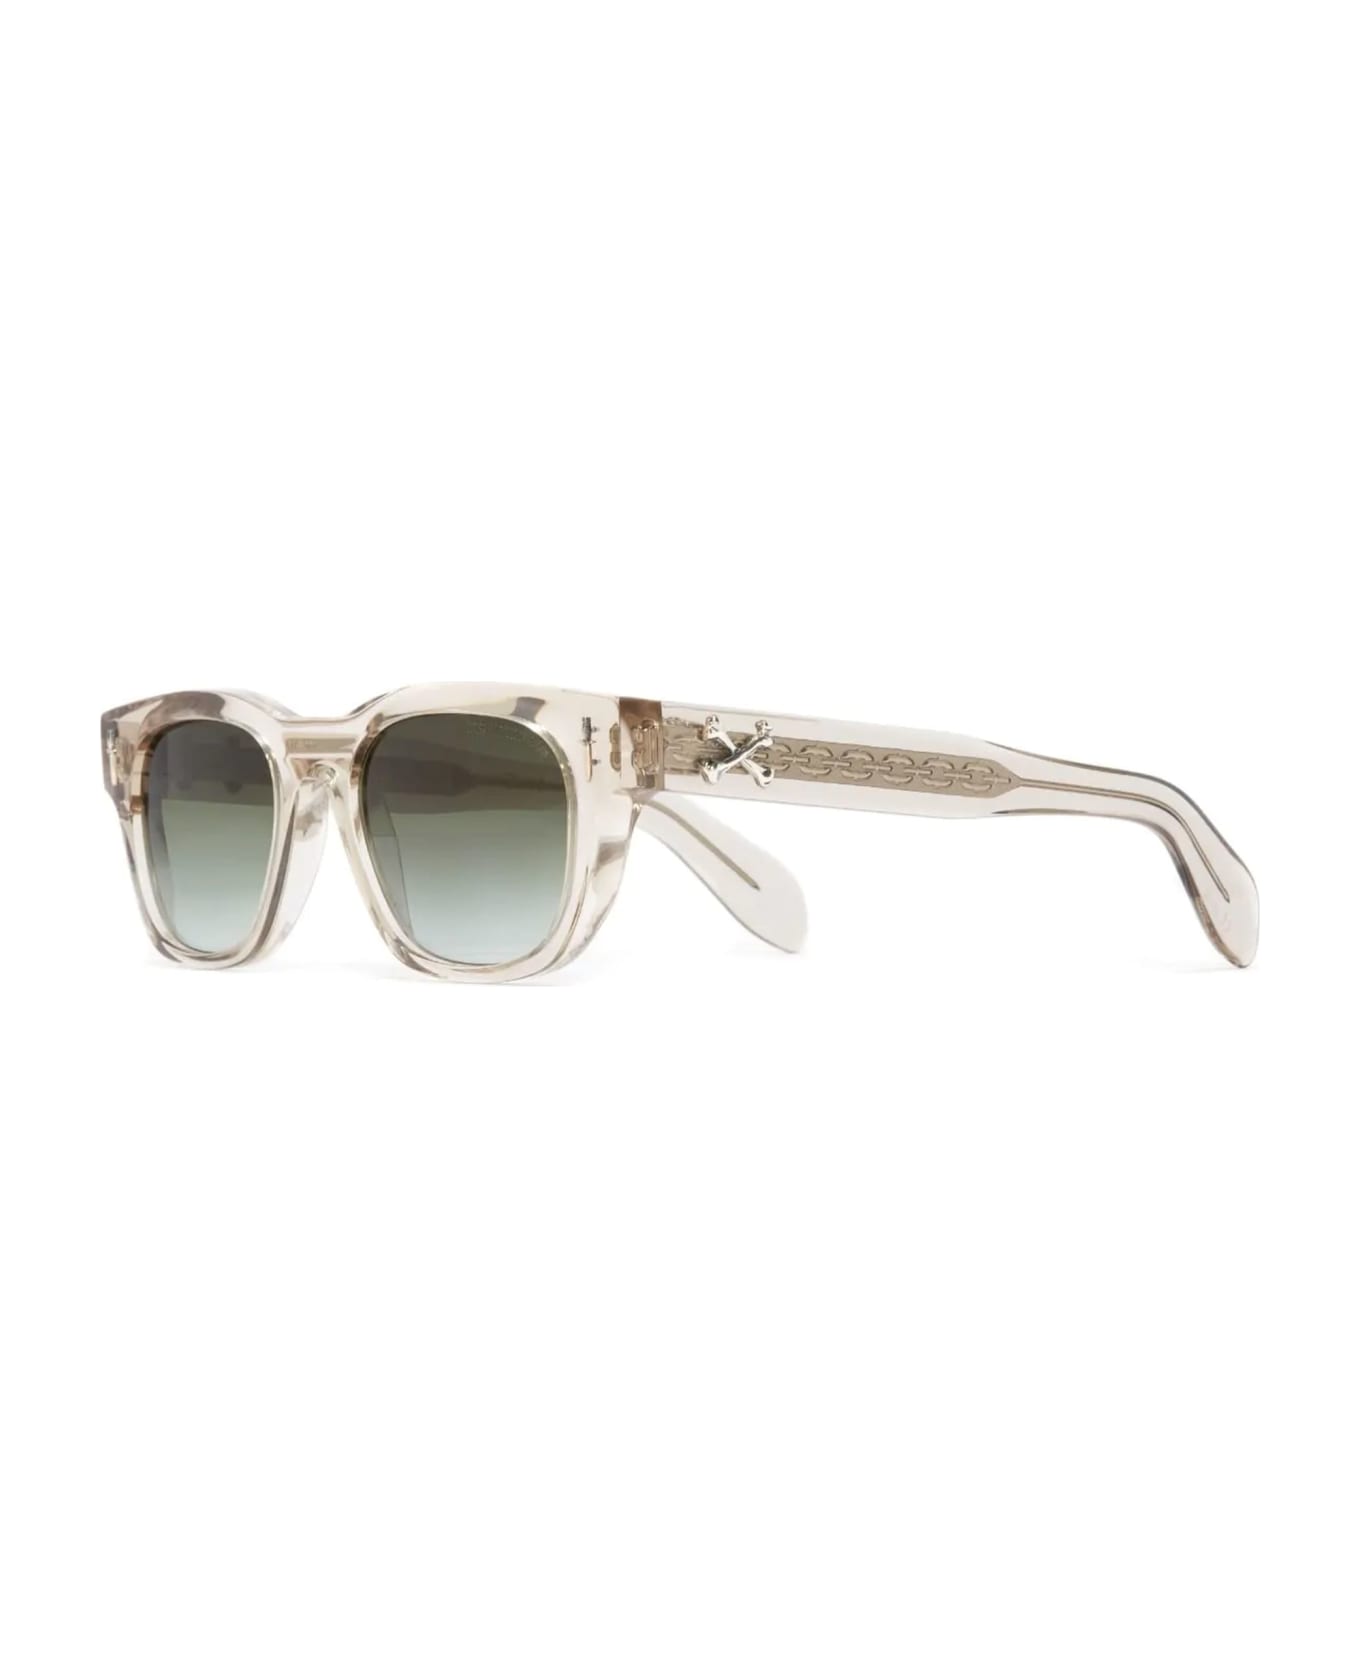 Cutler and Gross The Great Frog - Crossbones - Sand Crystal Sunglasses - transparent beige サングラス